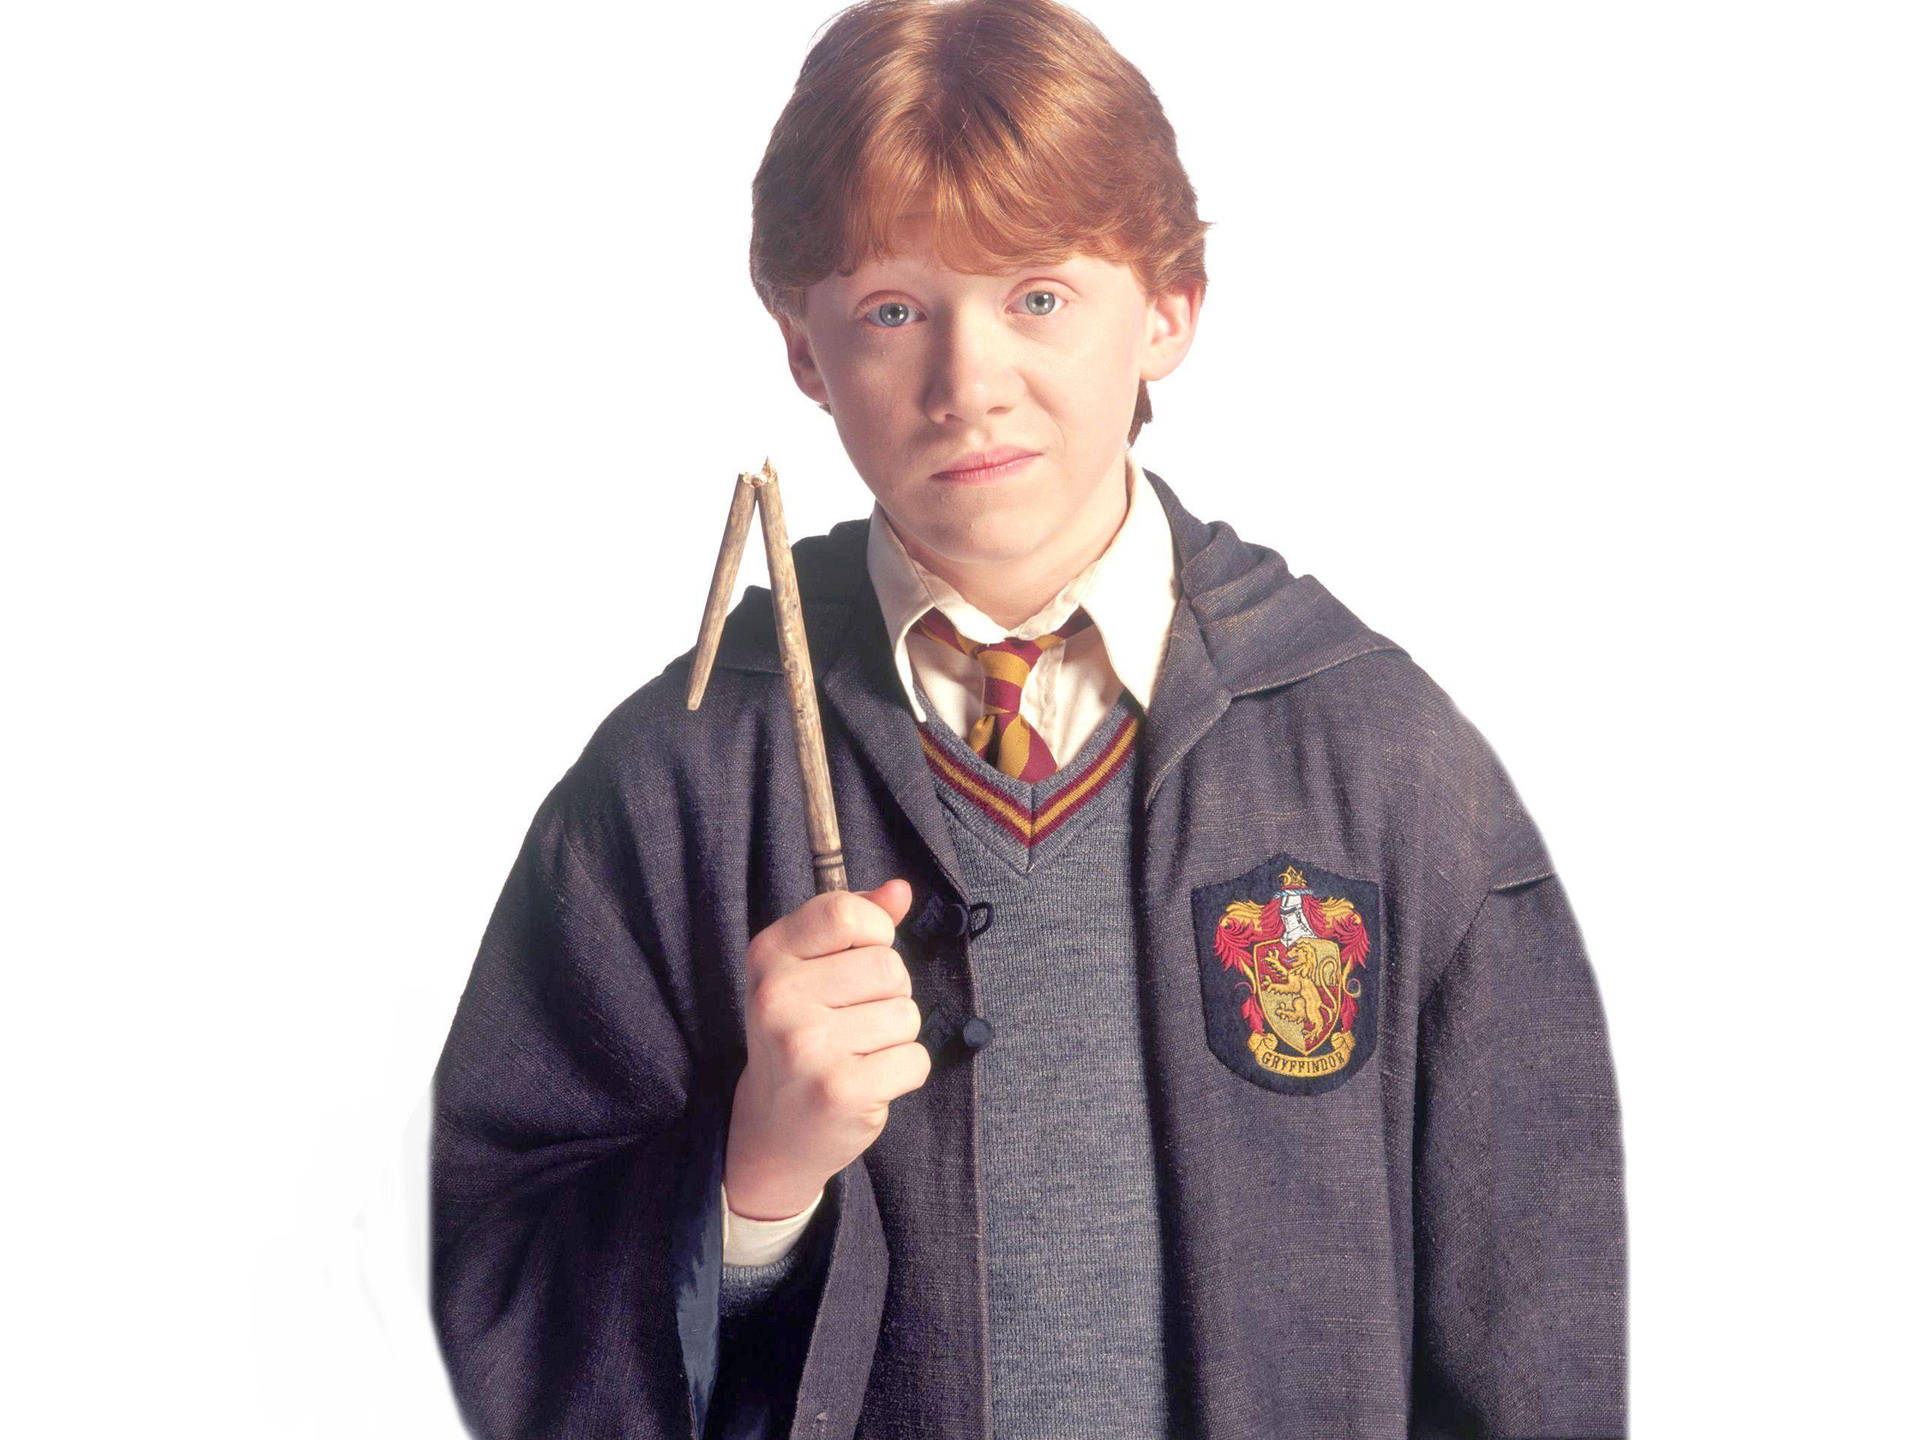 Ron Weasley Staring At His Broken Wand In Frustration